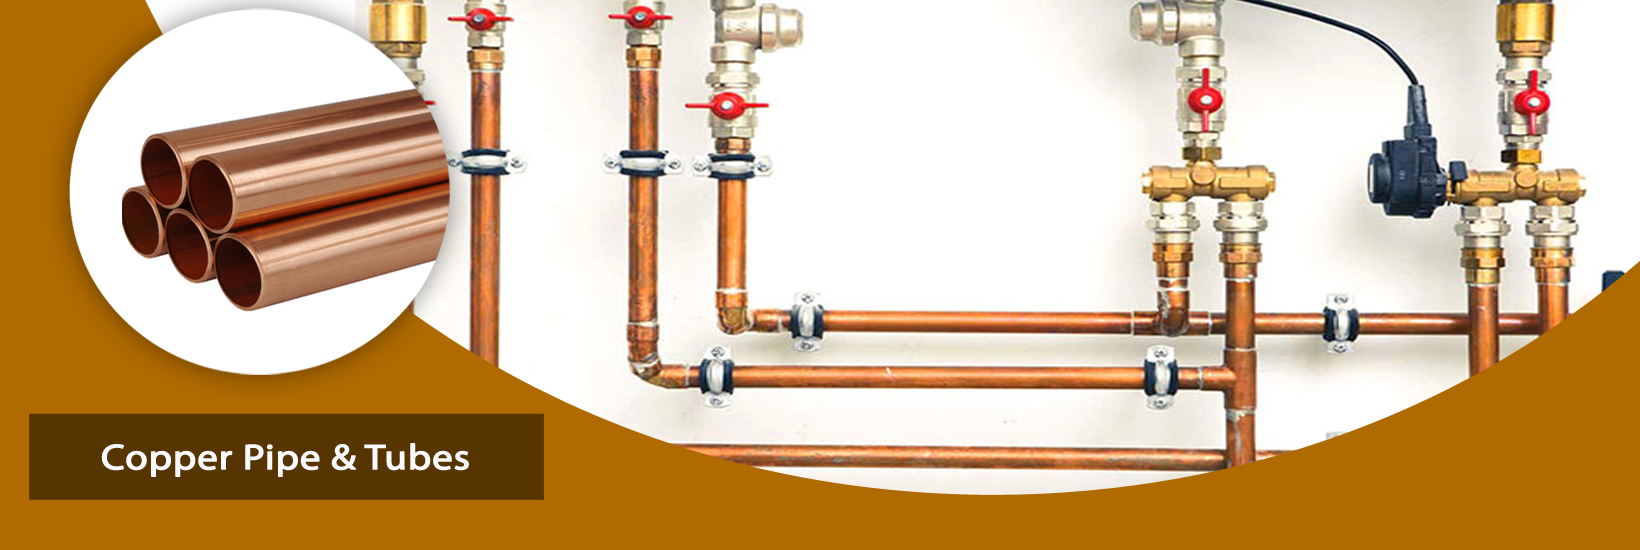 Lpg Gas Pipe Line Installation Services For Restaurant, Gas Manifold Dealers, Gas Pipe Line Installation Services For Laboratory, Lpg Gas Pipe Line Installation Services For Commercial, Industrial Gas Pipe Line Installation Services, Lpg Gas Pipe Line Installation Services For Hotel